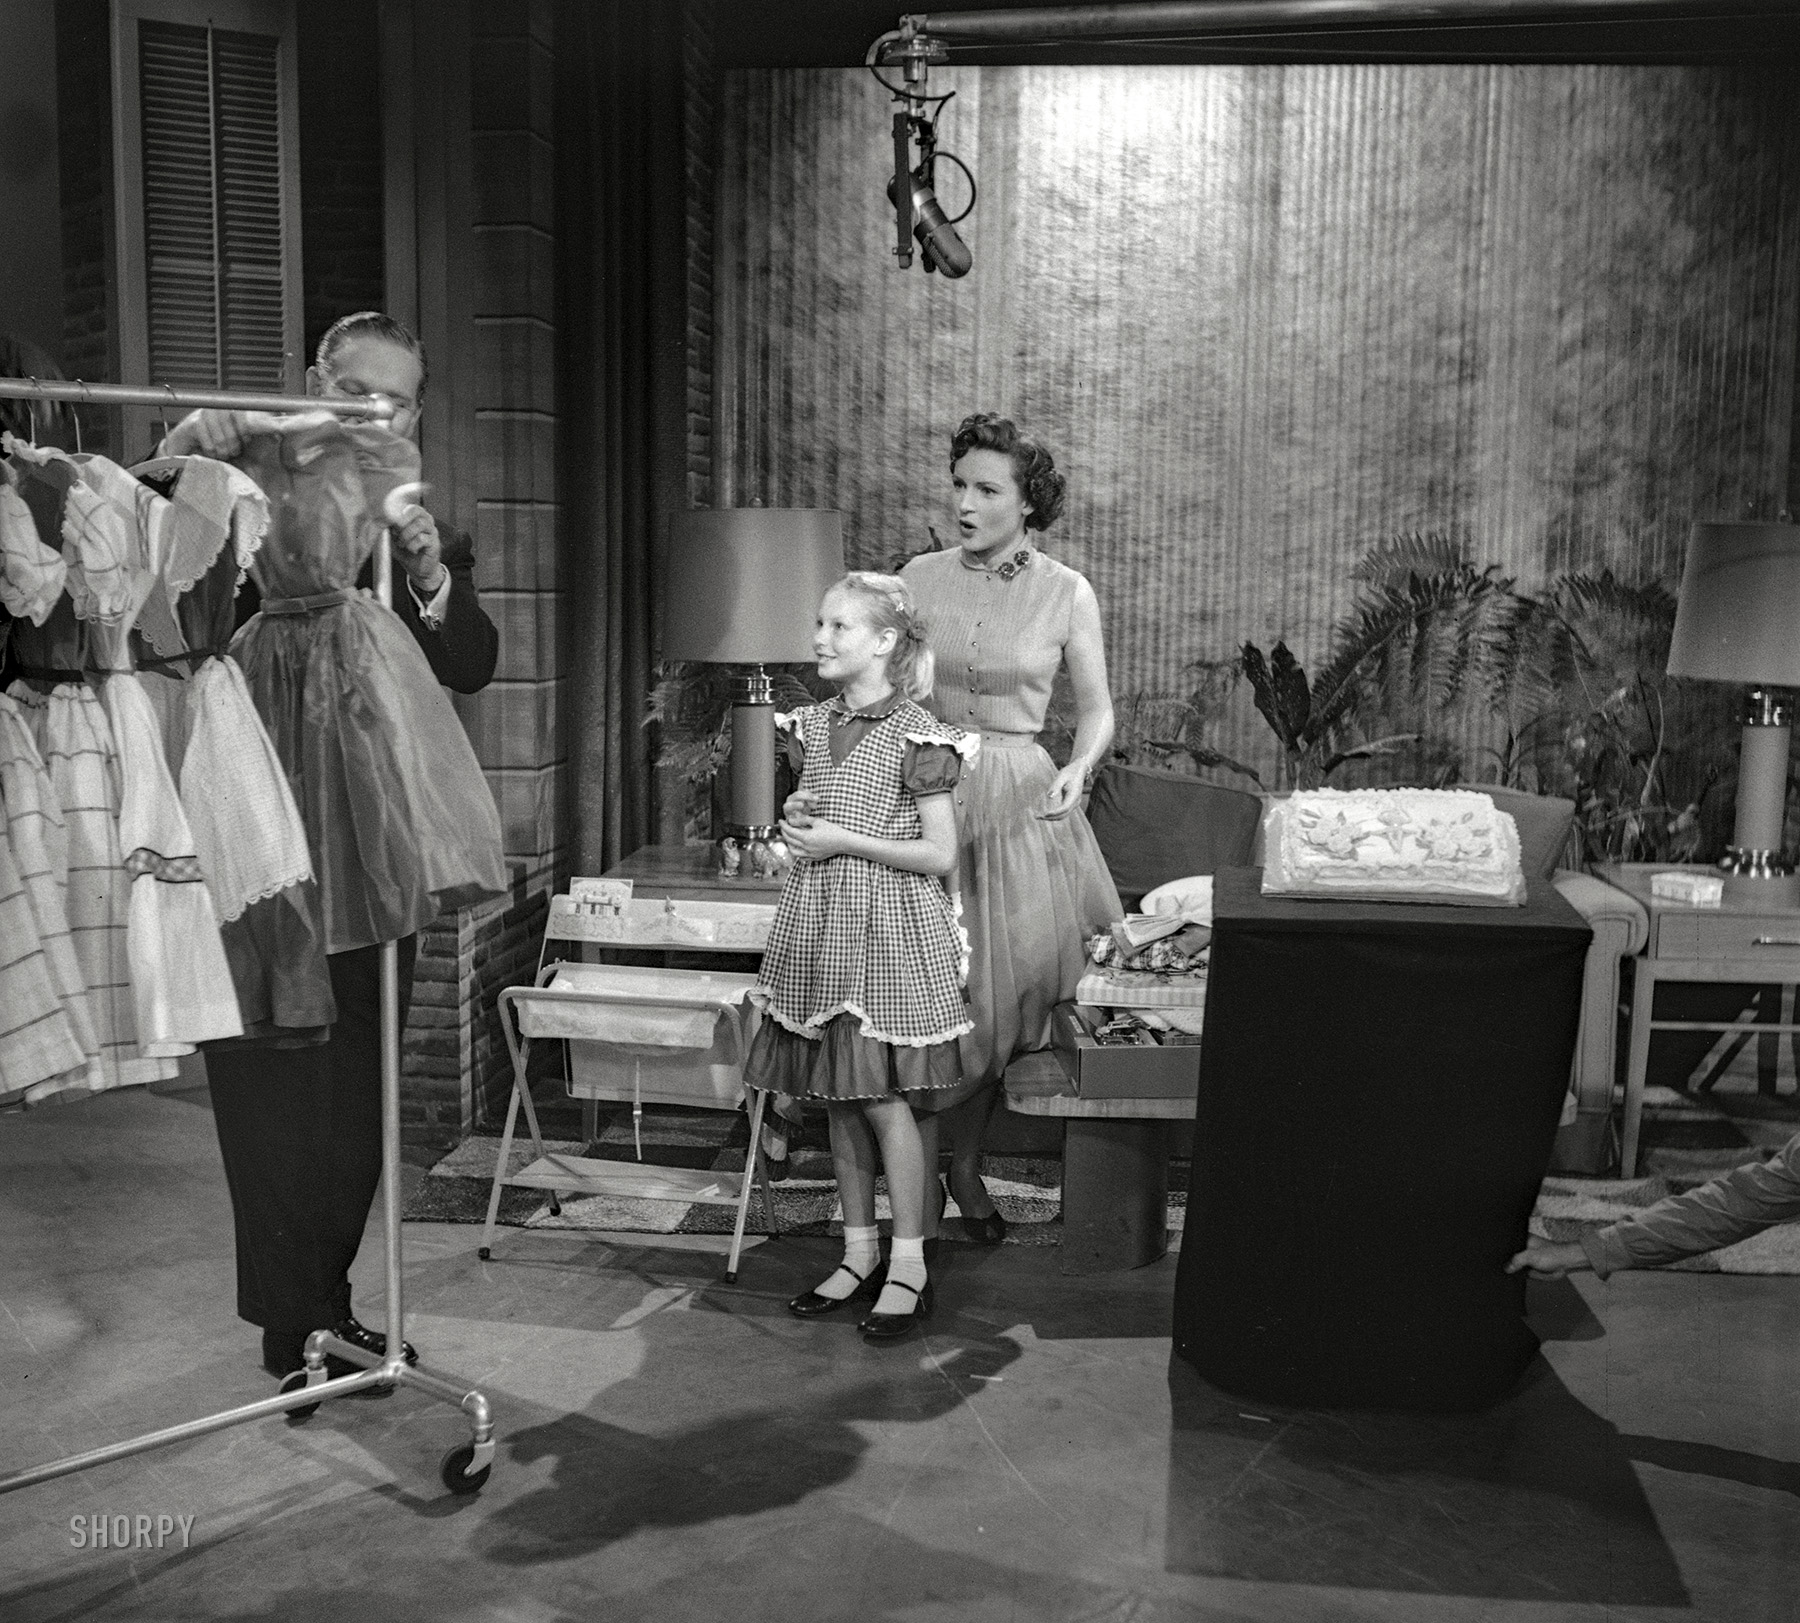 1954. "Los Angeles. Actress Betty White rehearsing and performing on her daytime television talk show. Photos include preparations for a girl's birthday party." From photos by Maurice Terrell and Earl Theisen for Look magazine. View full size.